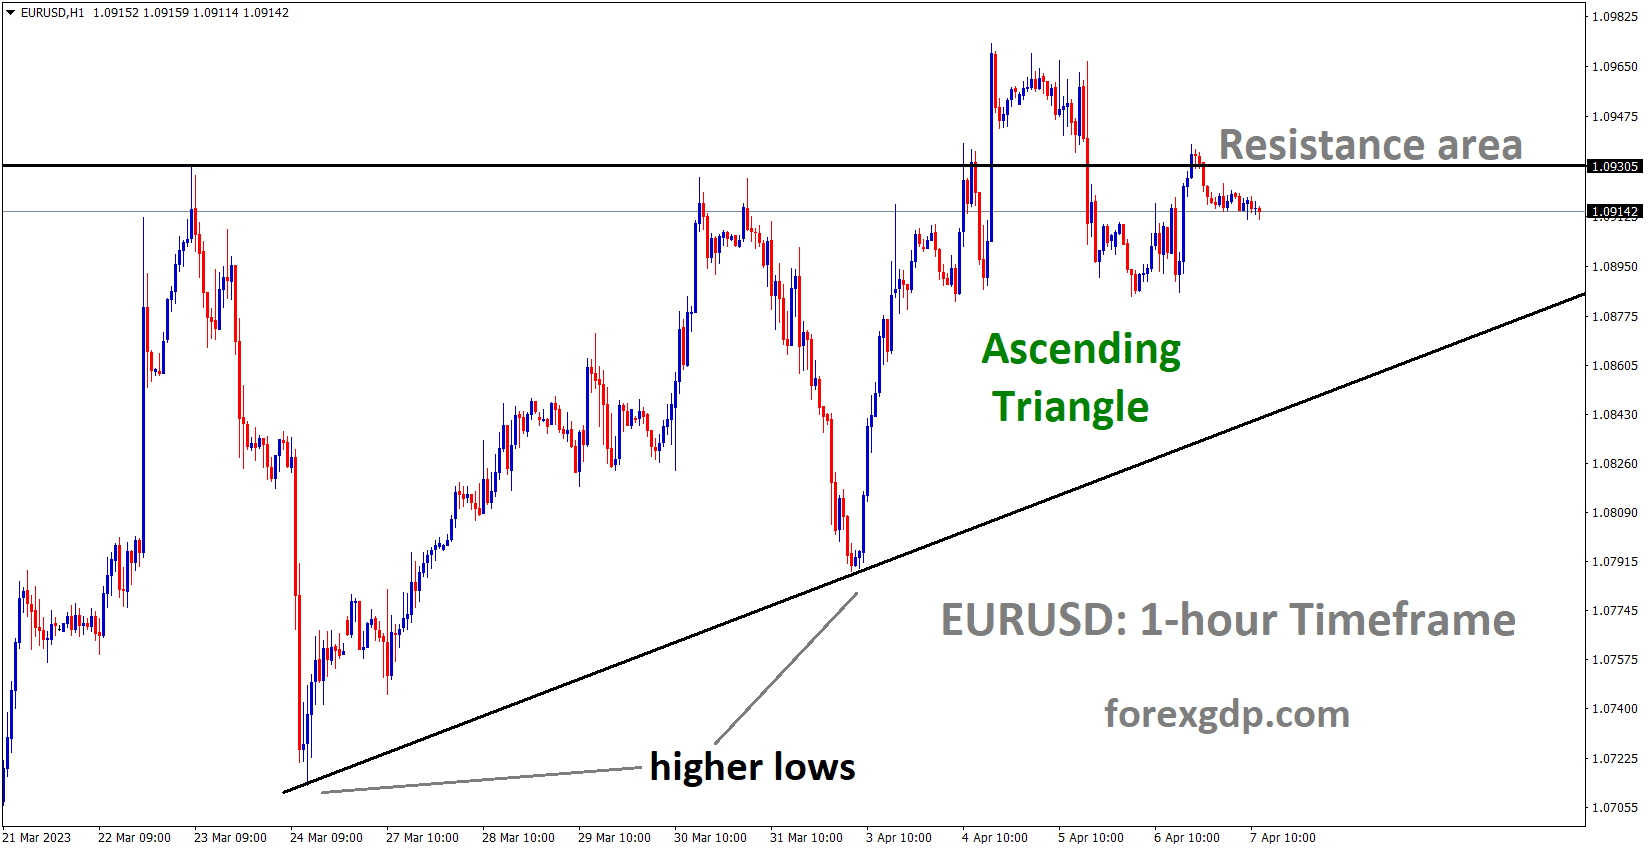 EURUSD is moving in an Ascending triangle pattern and the market has reached the resistance area of the pattern 2